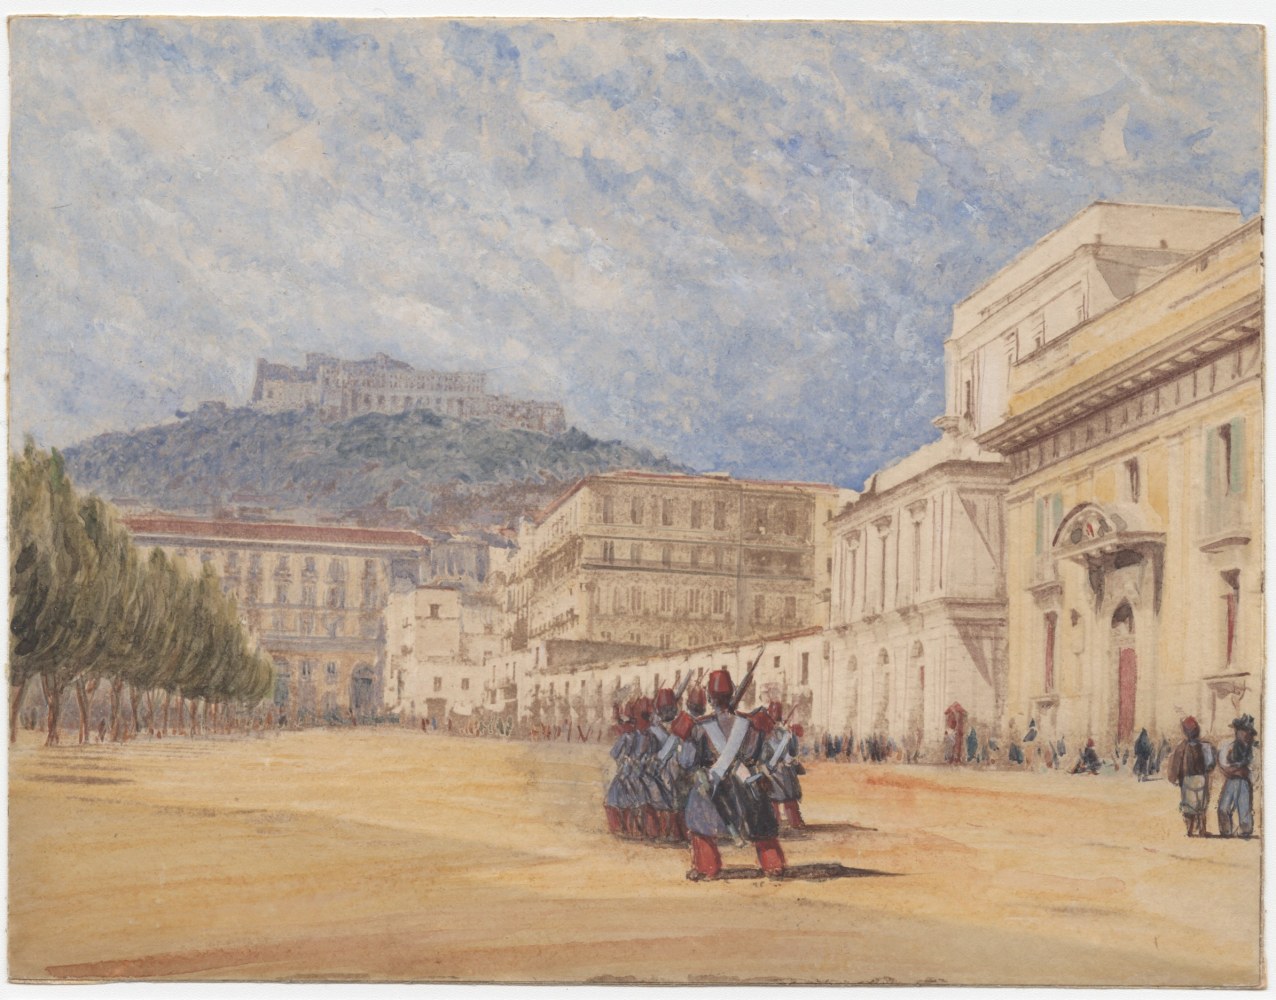 Rev. Calvert Richard JONES (Welsh, 1802-1877) Soldiers in formation, Chiatamone, Naples, 1847 Hand-colored salt print from a calotype negative, spring 1846 15.3 x 19.9 cm